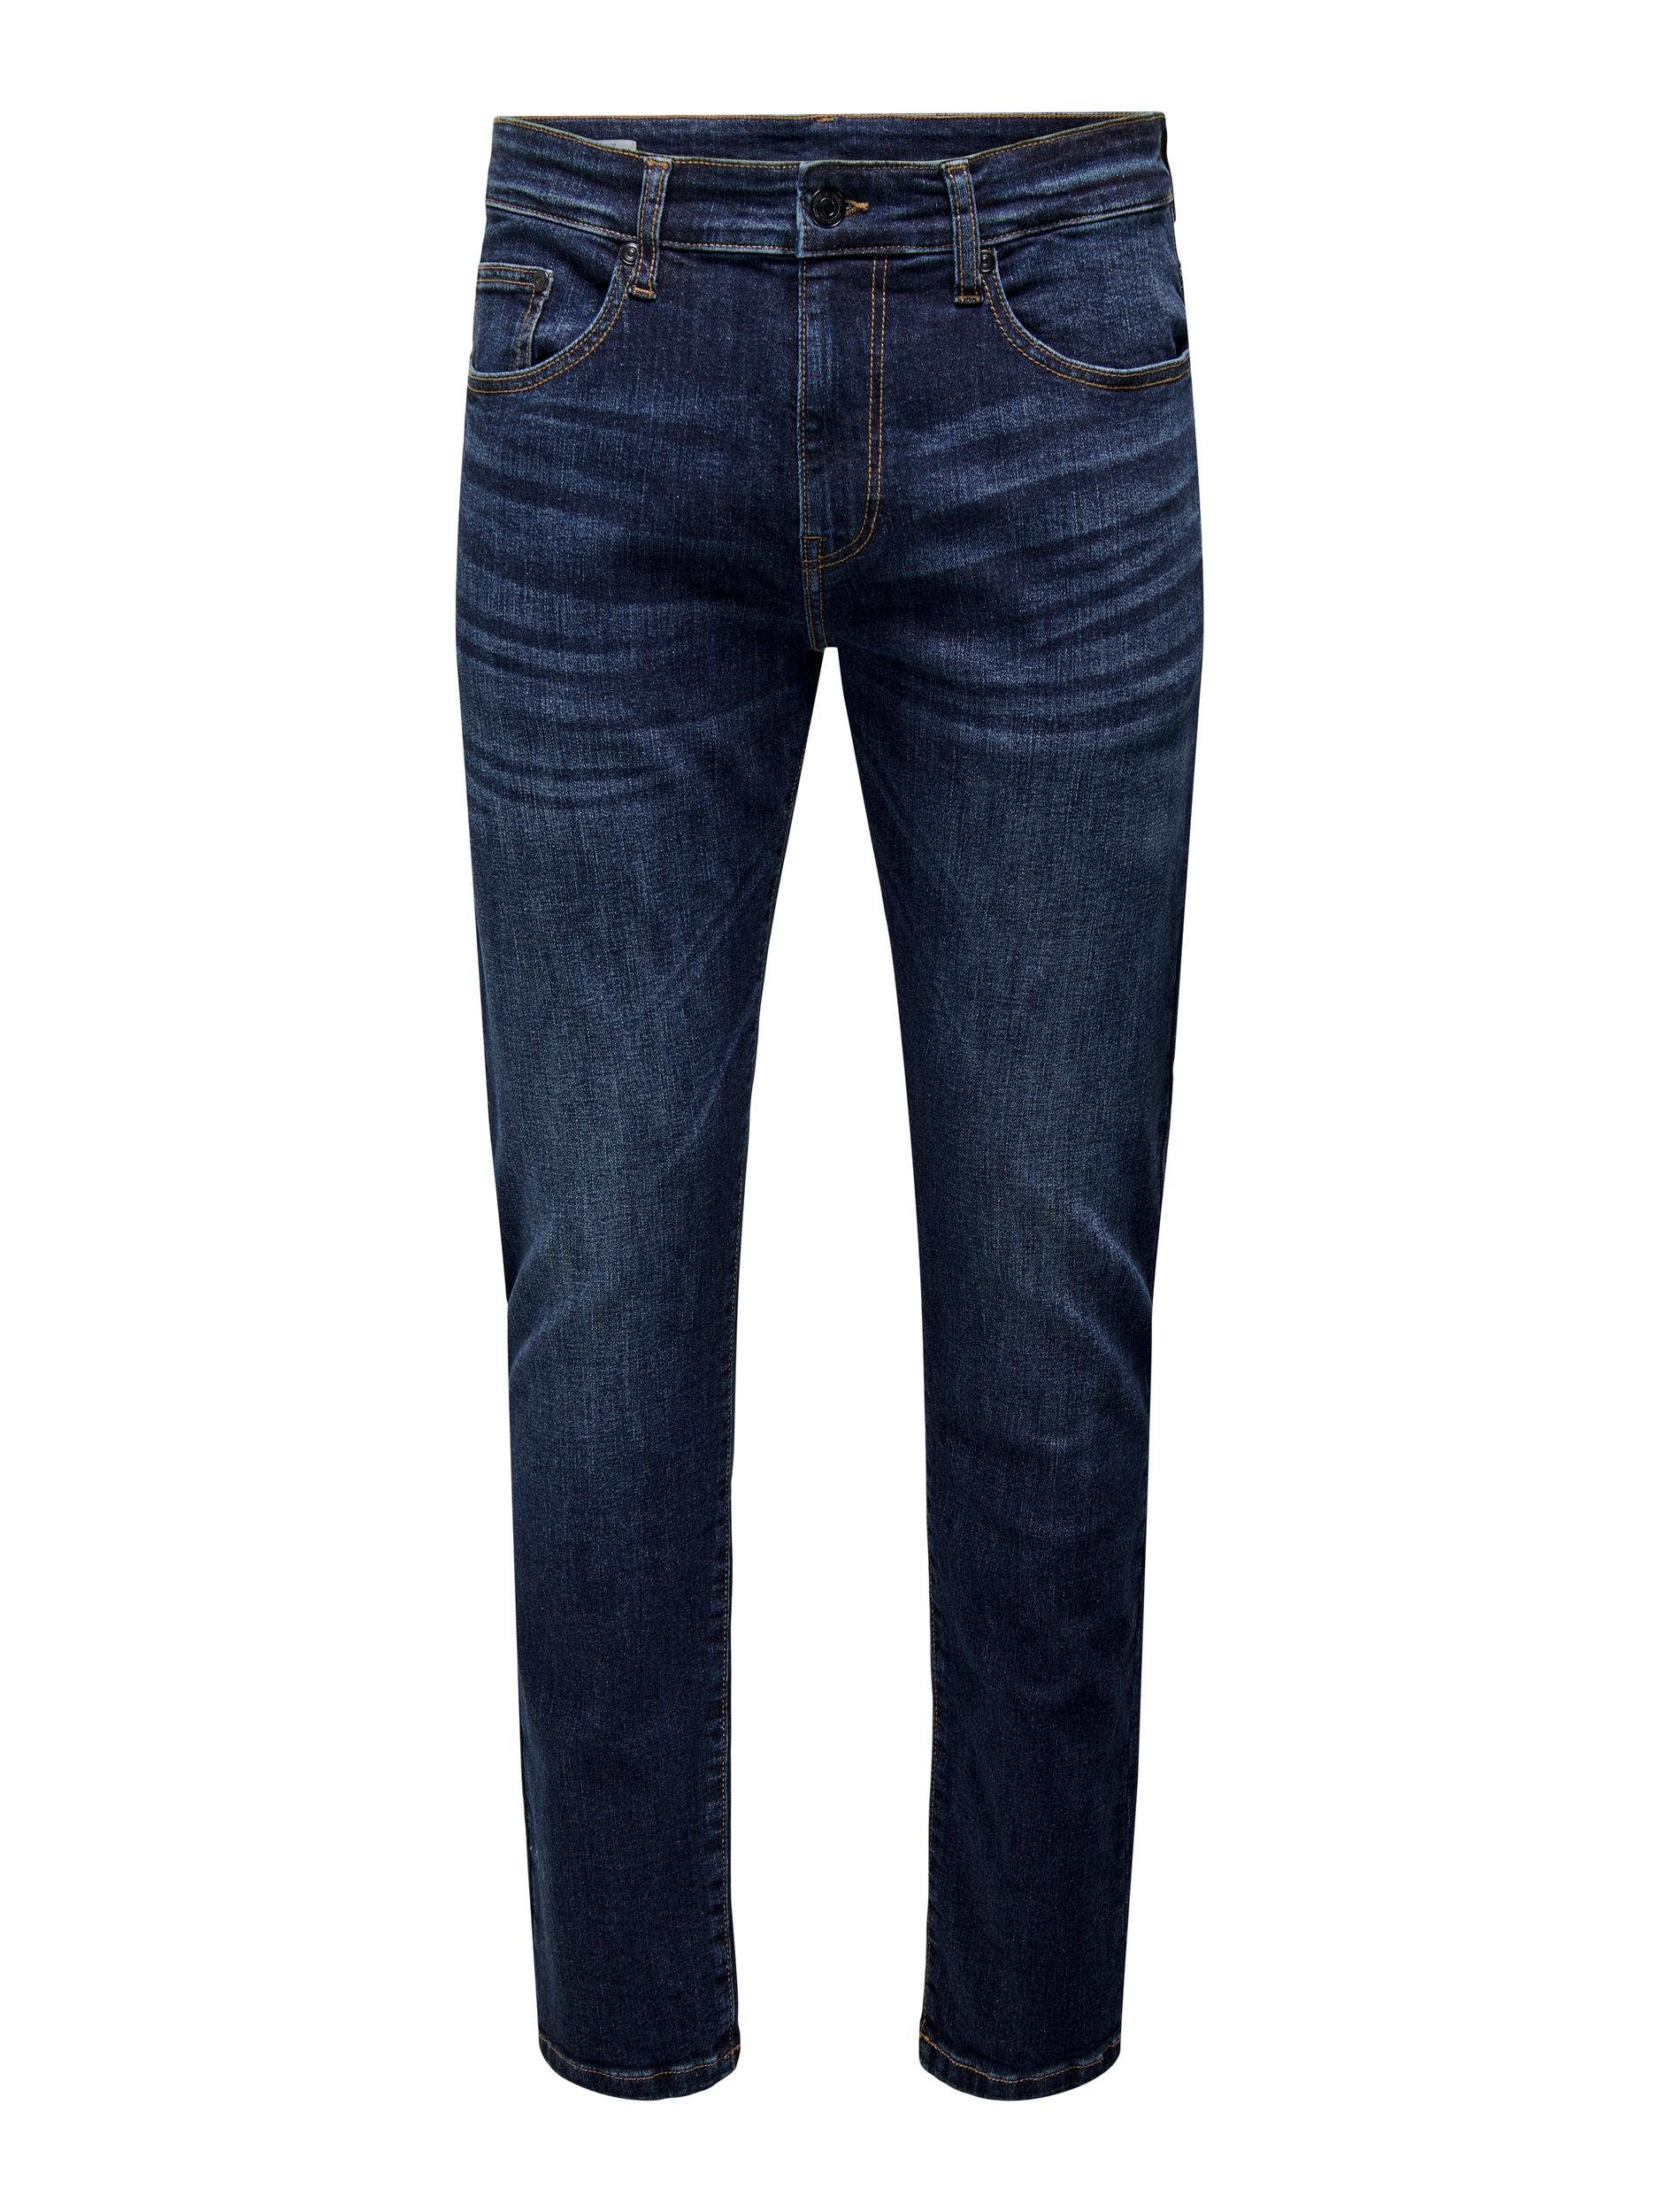 ONLY & SONS Straight-Jeans ONSWEFT REG.DK. BLUE 6752 DNM JEANS NOOS